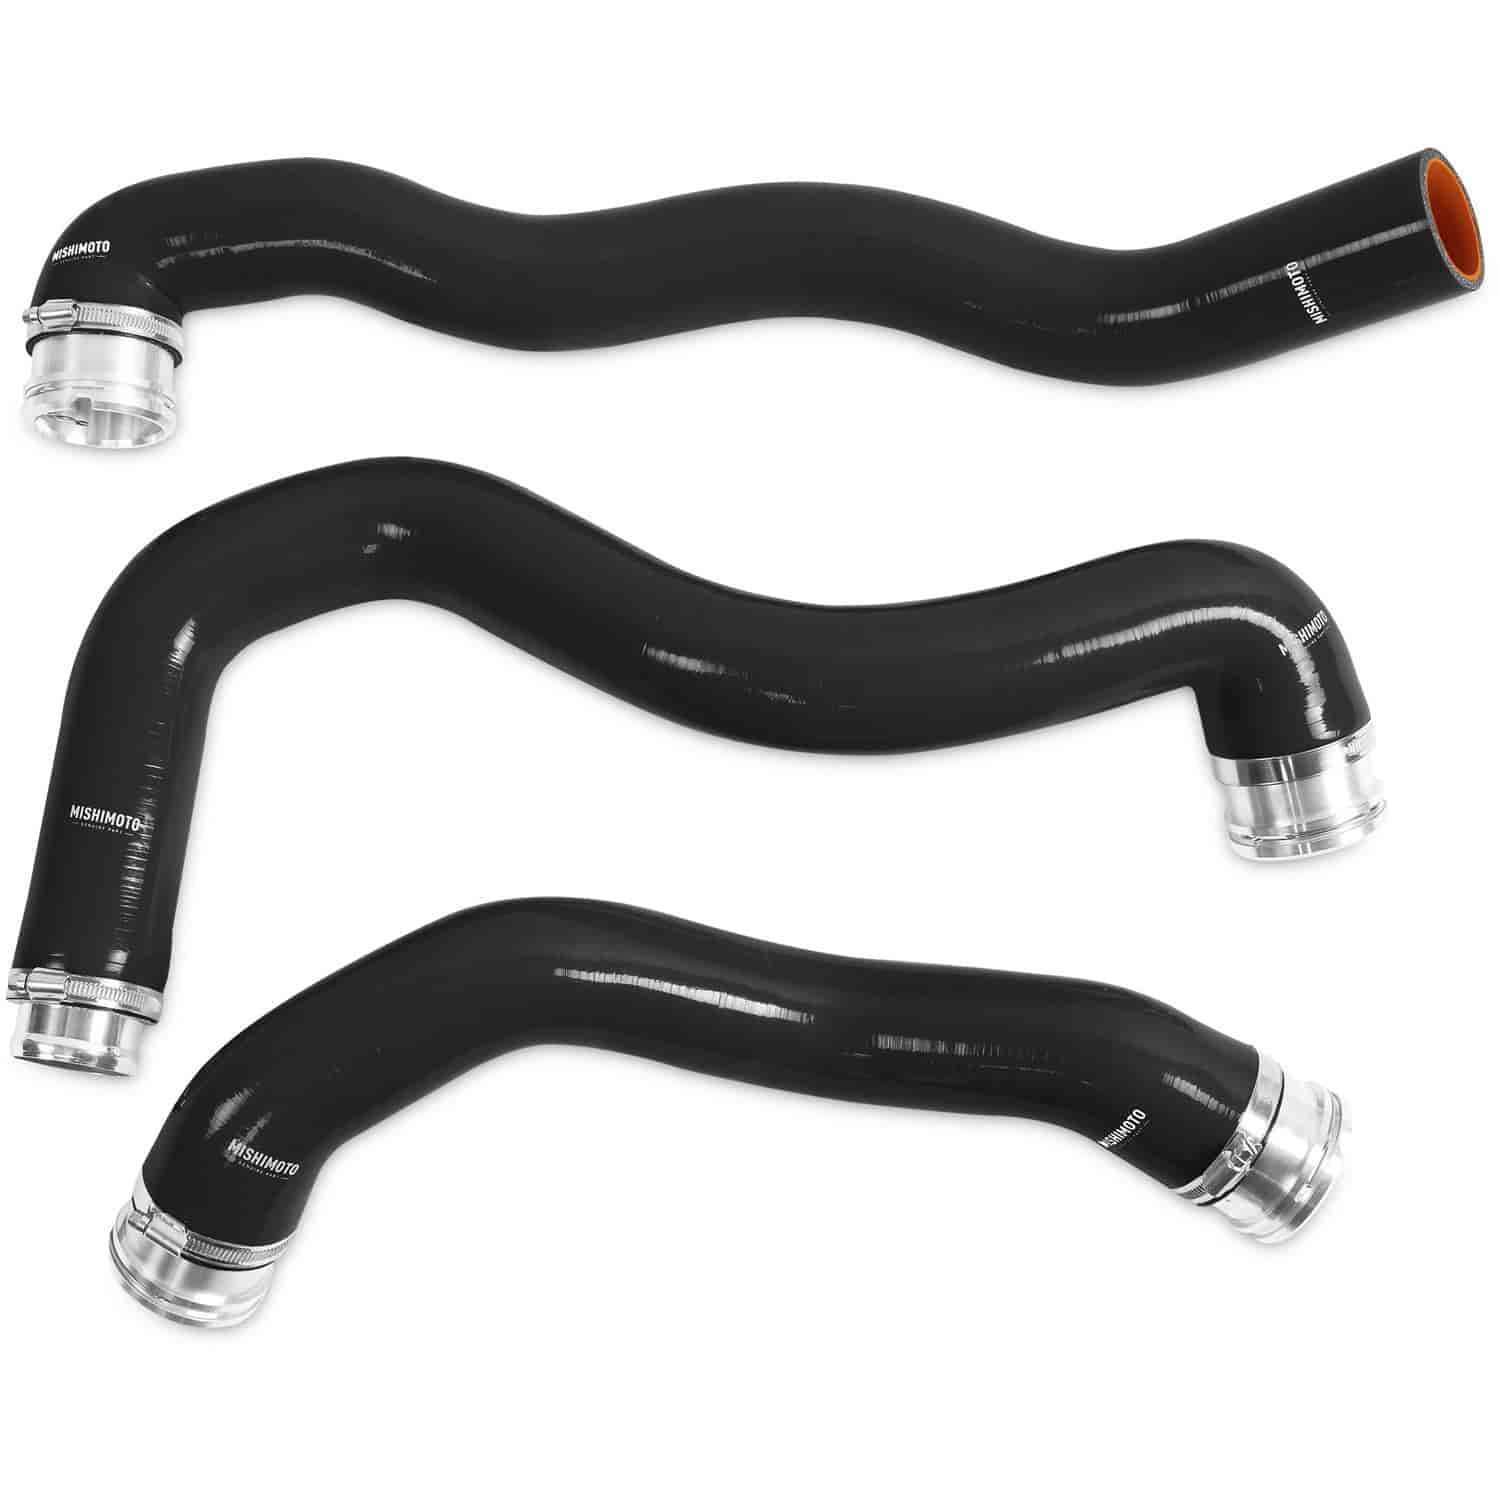 Silicone Coolant Hose Kit 2008-2010 Ford Truck 6.4L Powerstroke